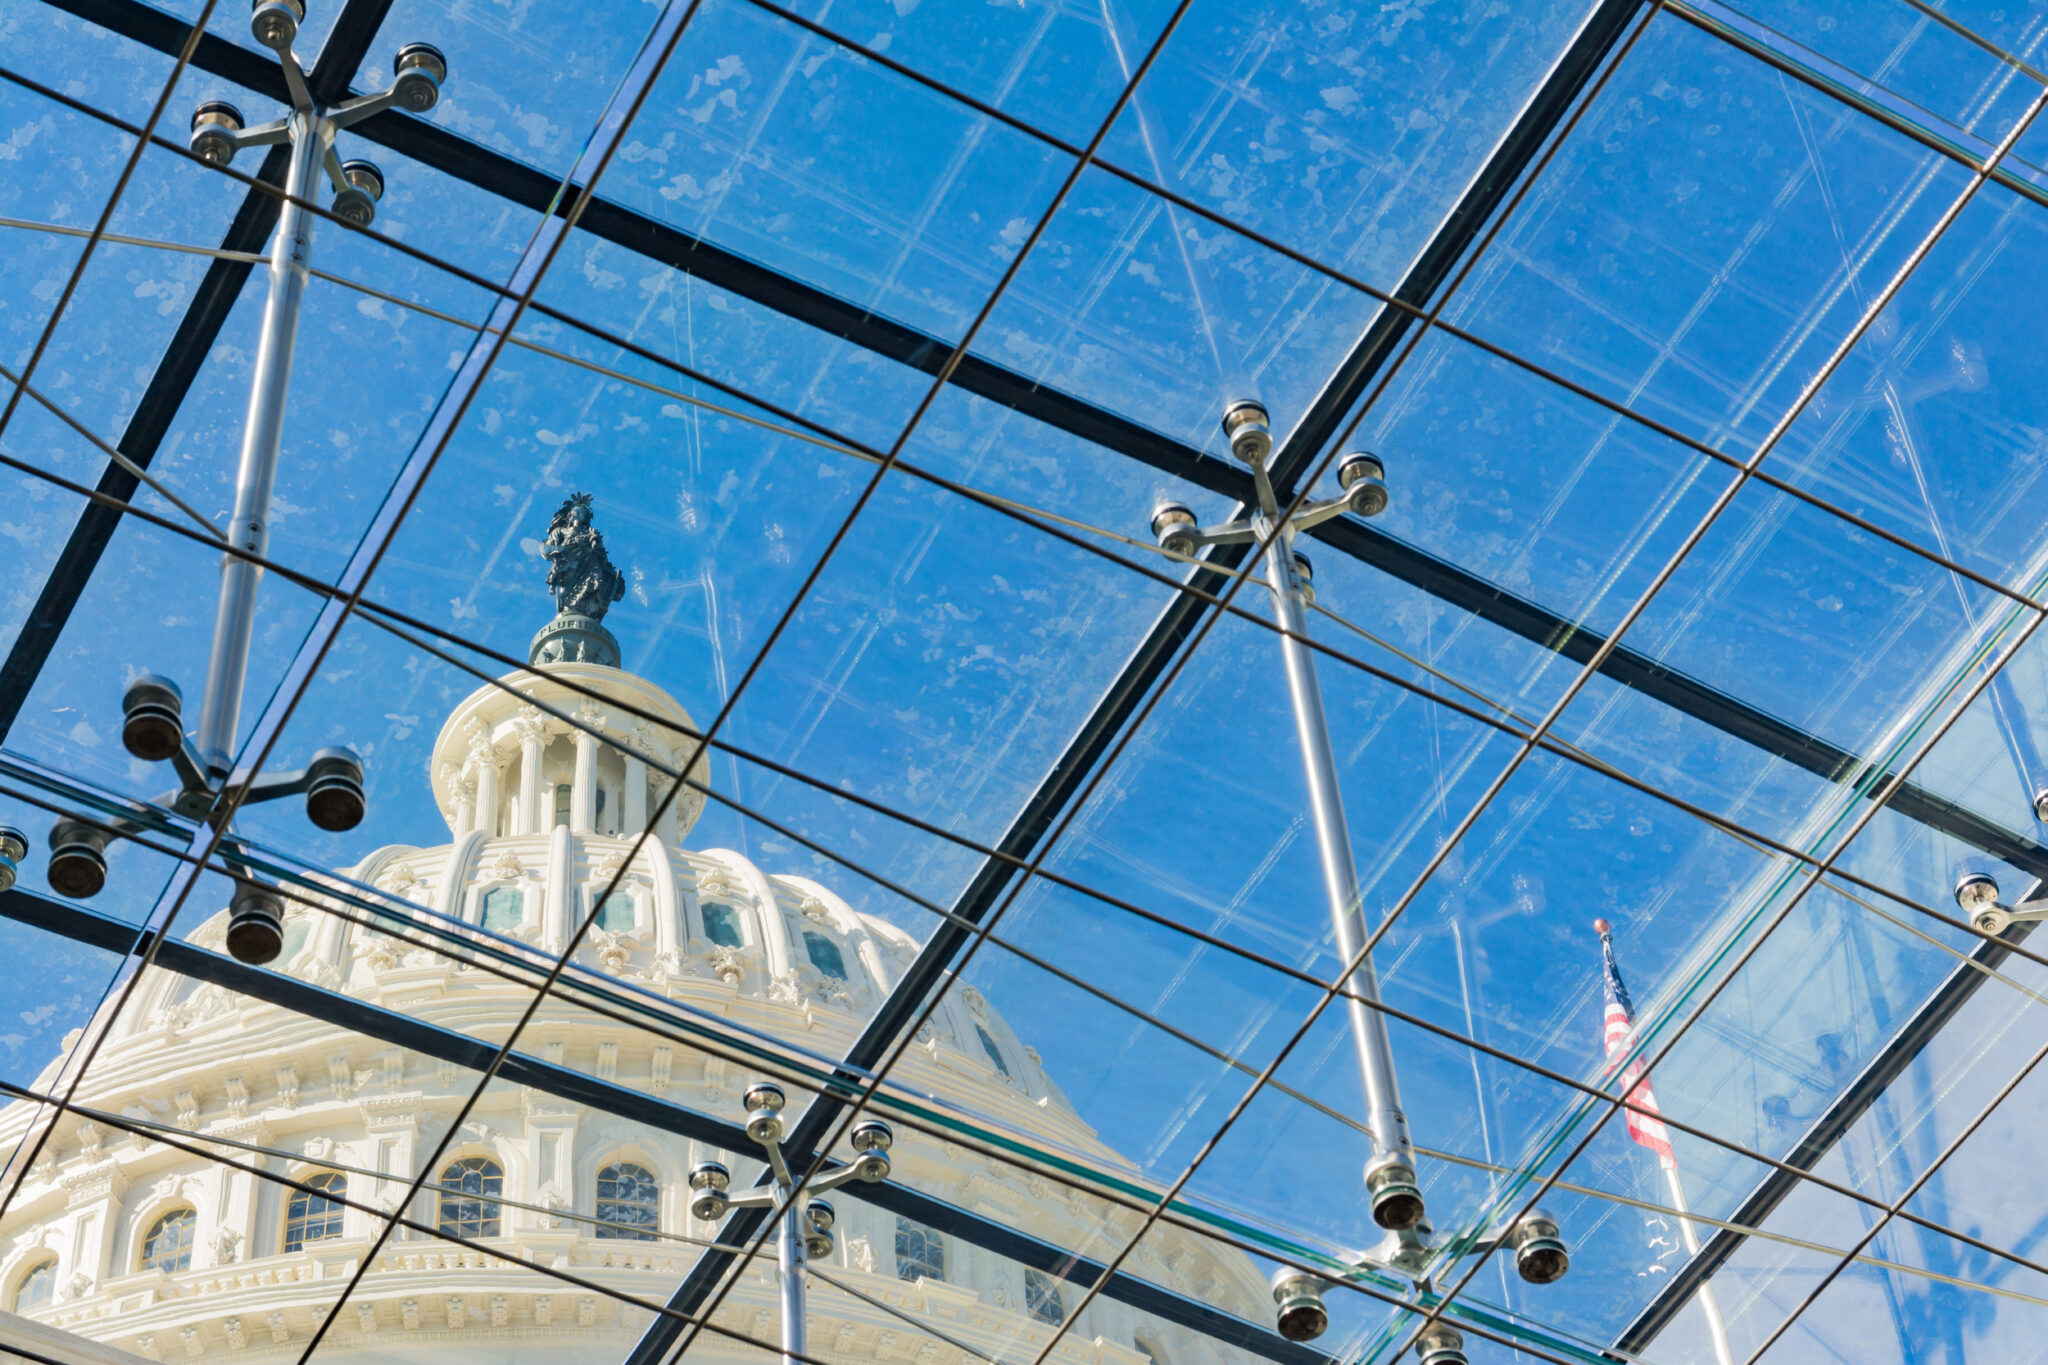 US Capitol Building Through Glass Windows Metal Chrome Supports